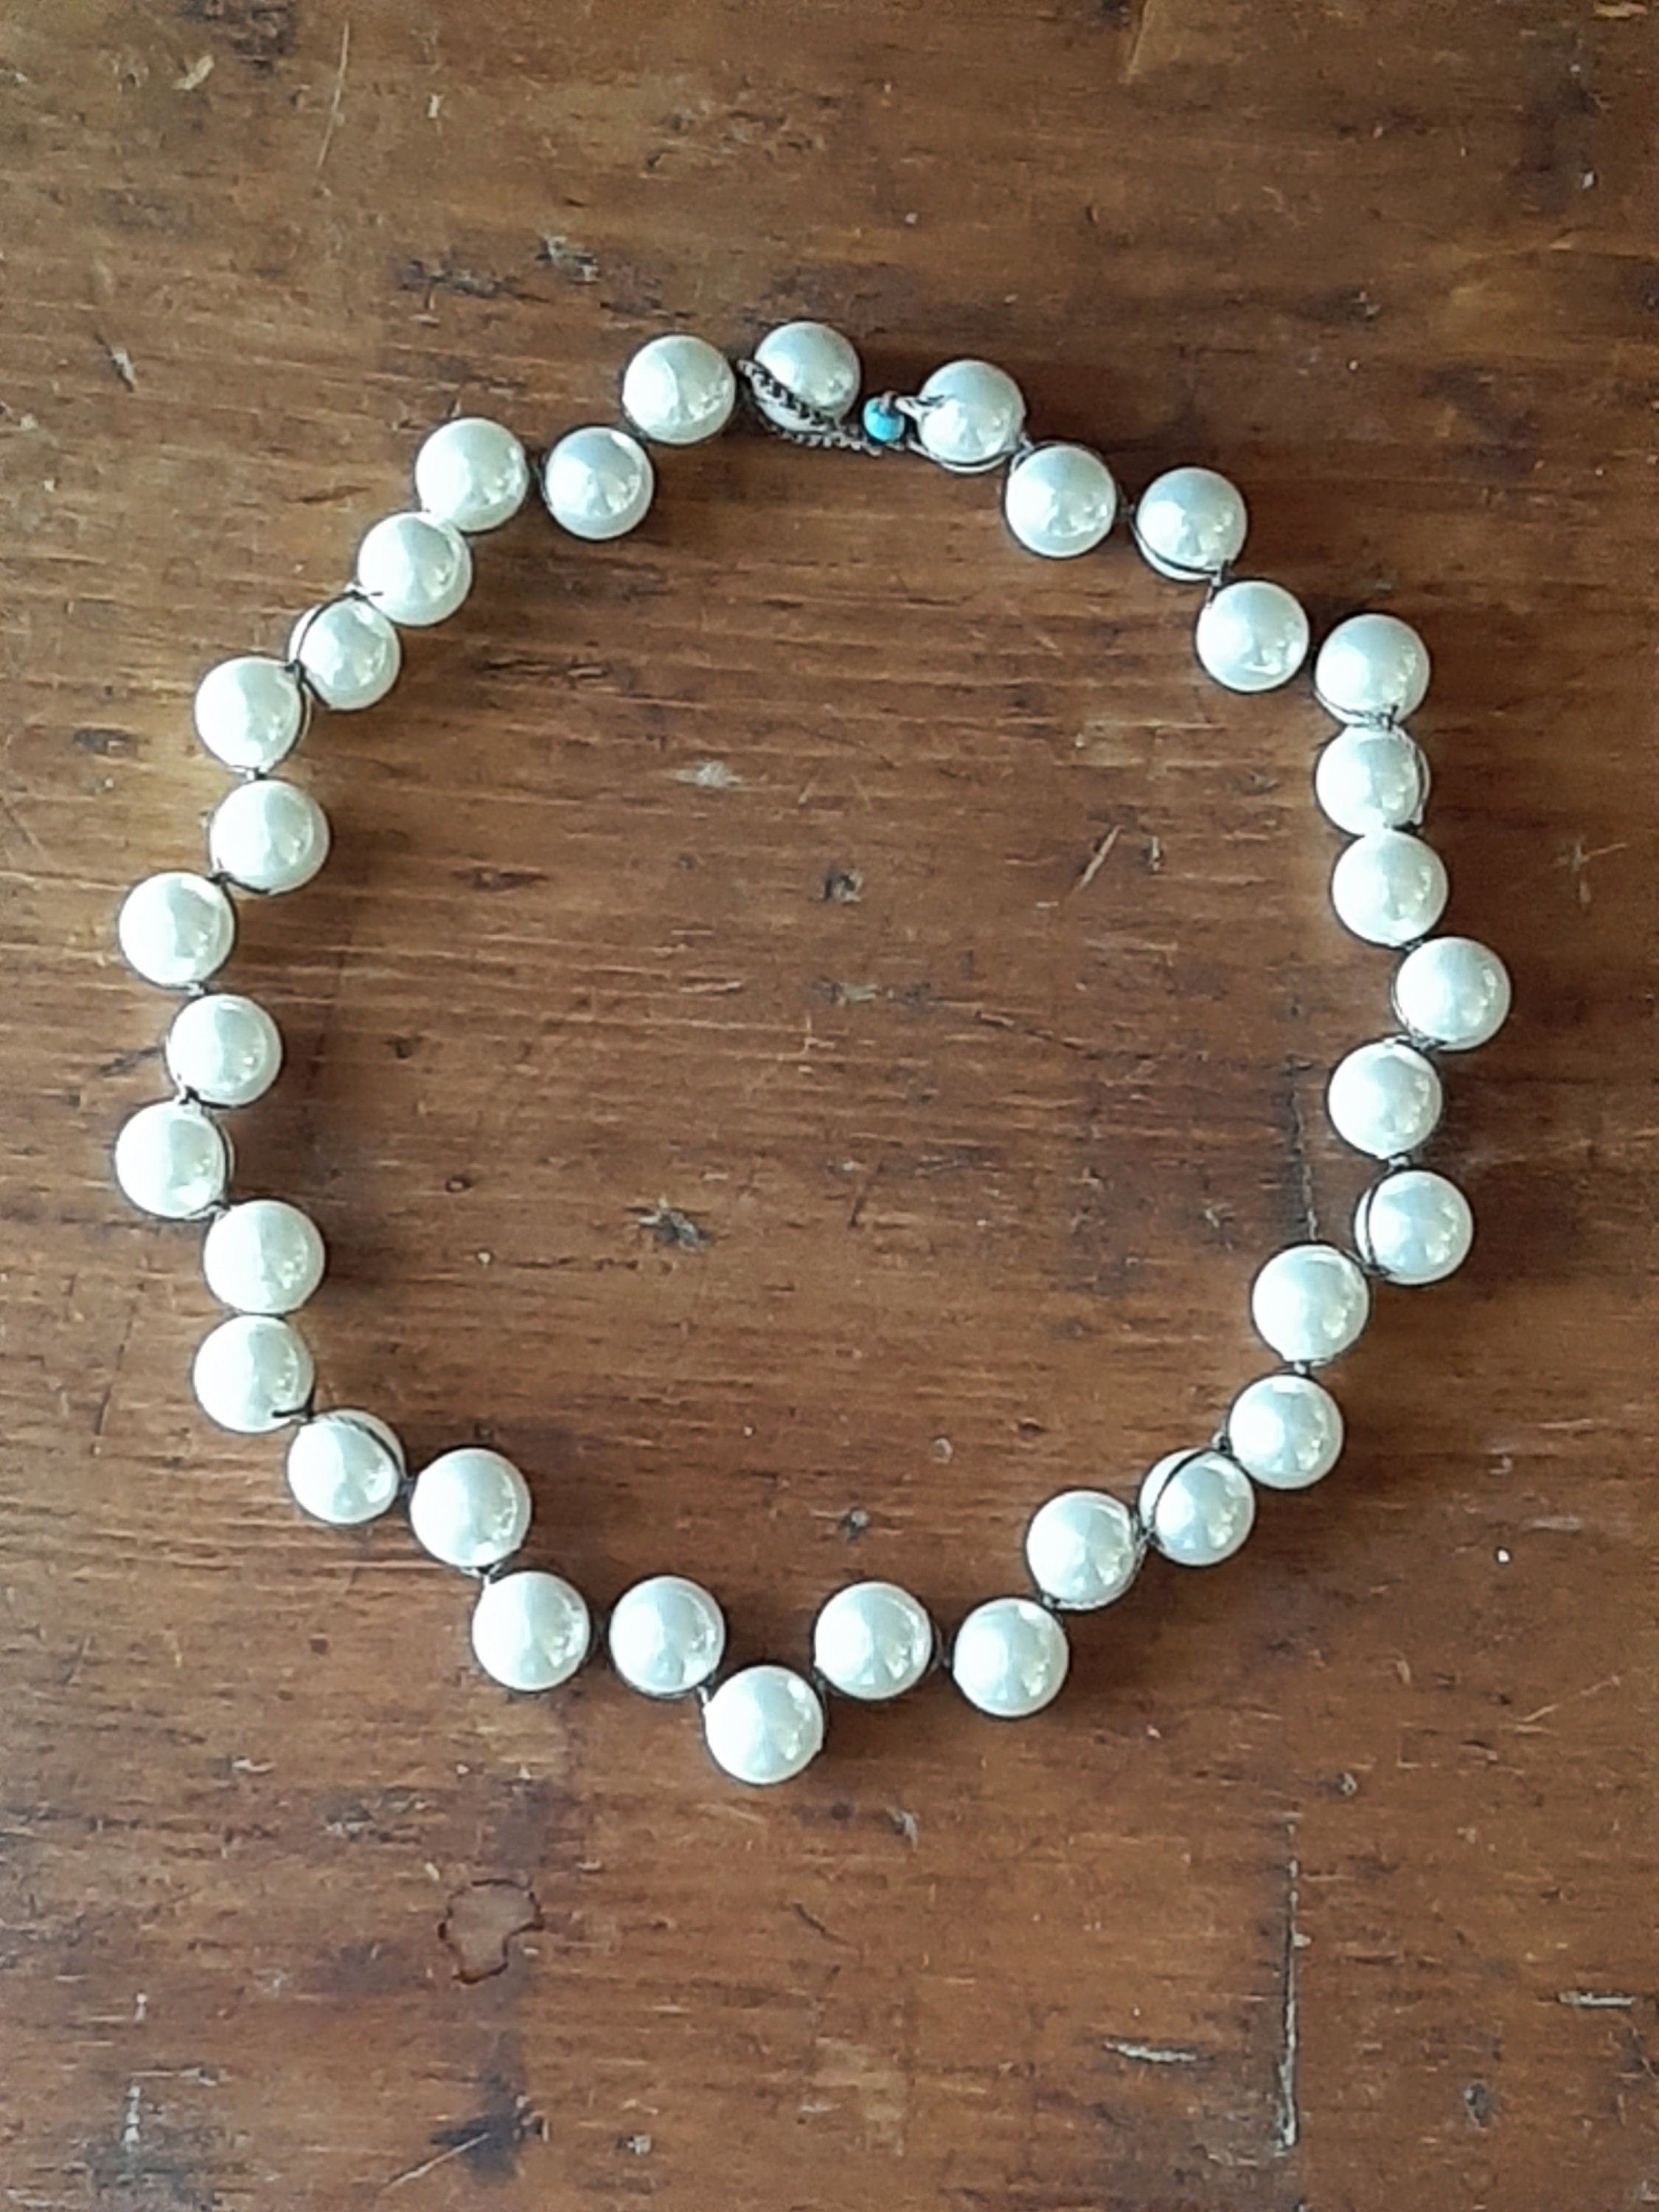 Boho knotted pearl necklace - Love Me Knot